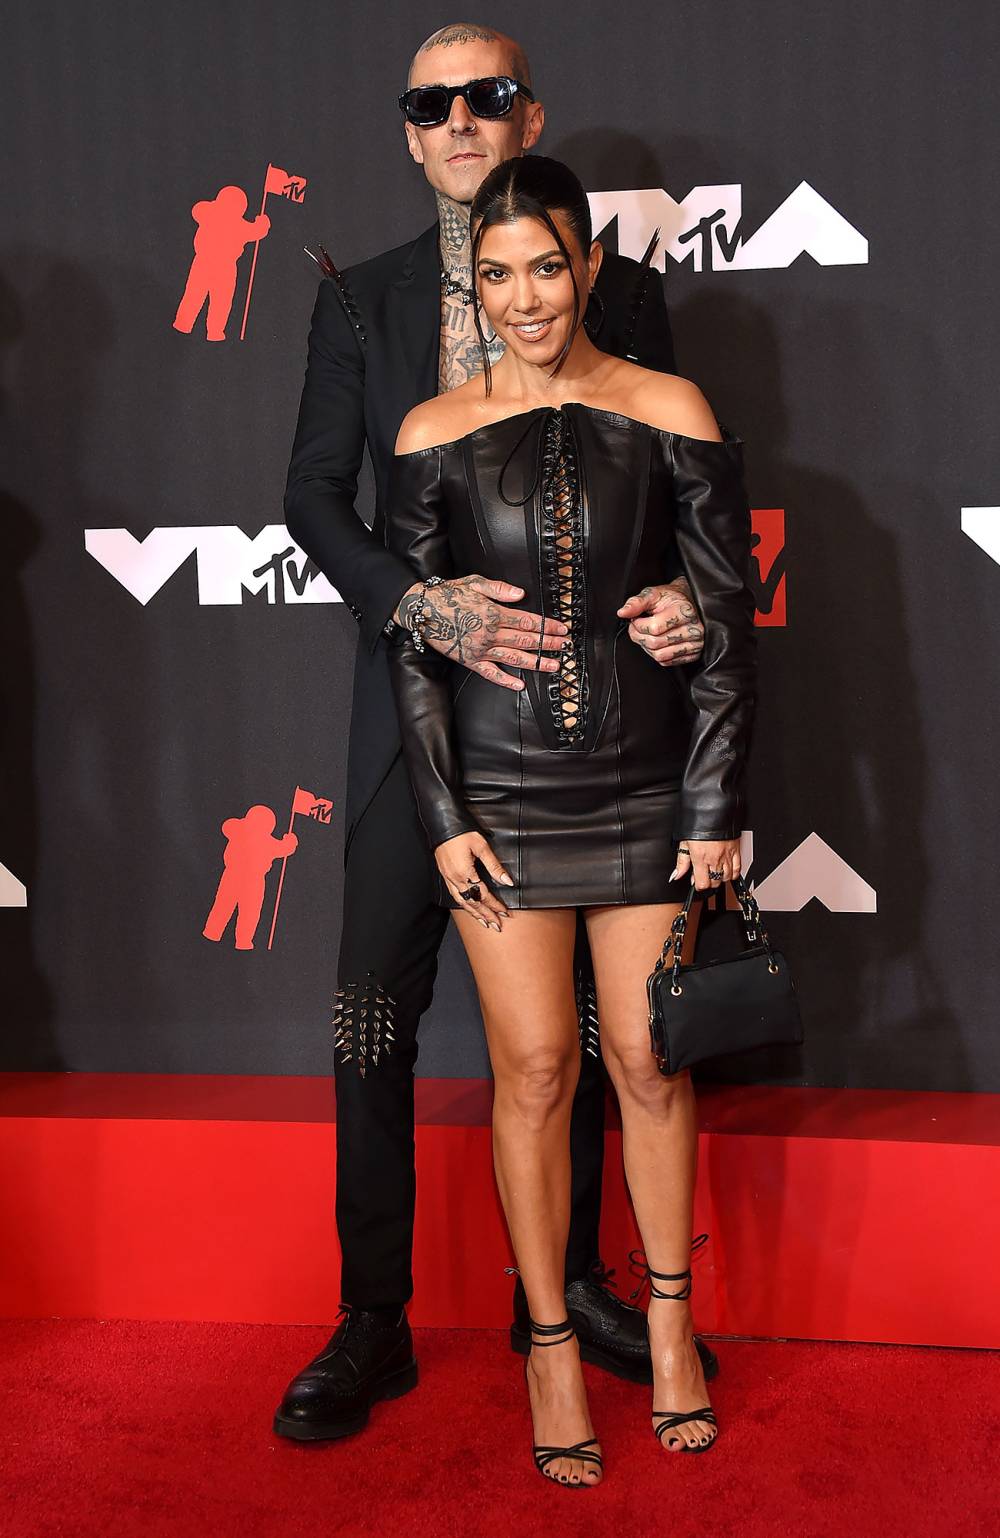 Kourtney Kardashian and Travis Barker Take PDA to Another Level With Christmas-Themed Foot Pic